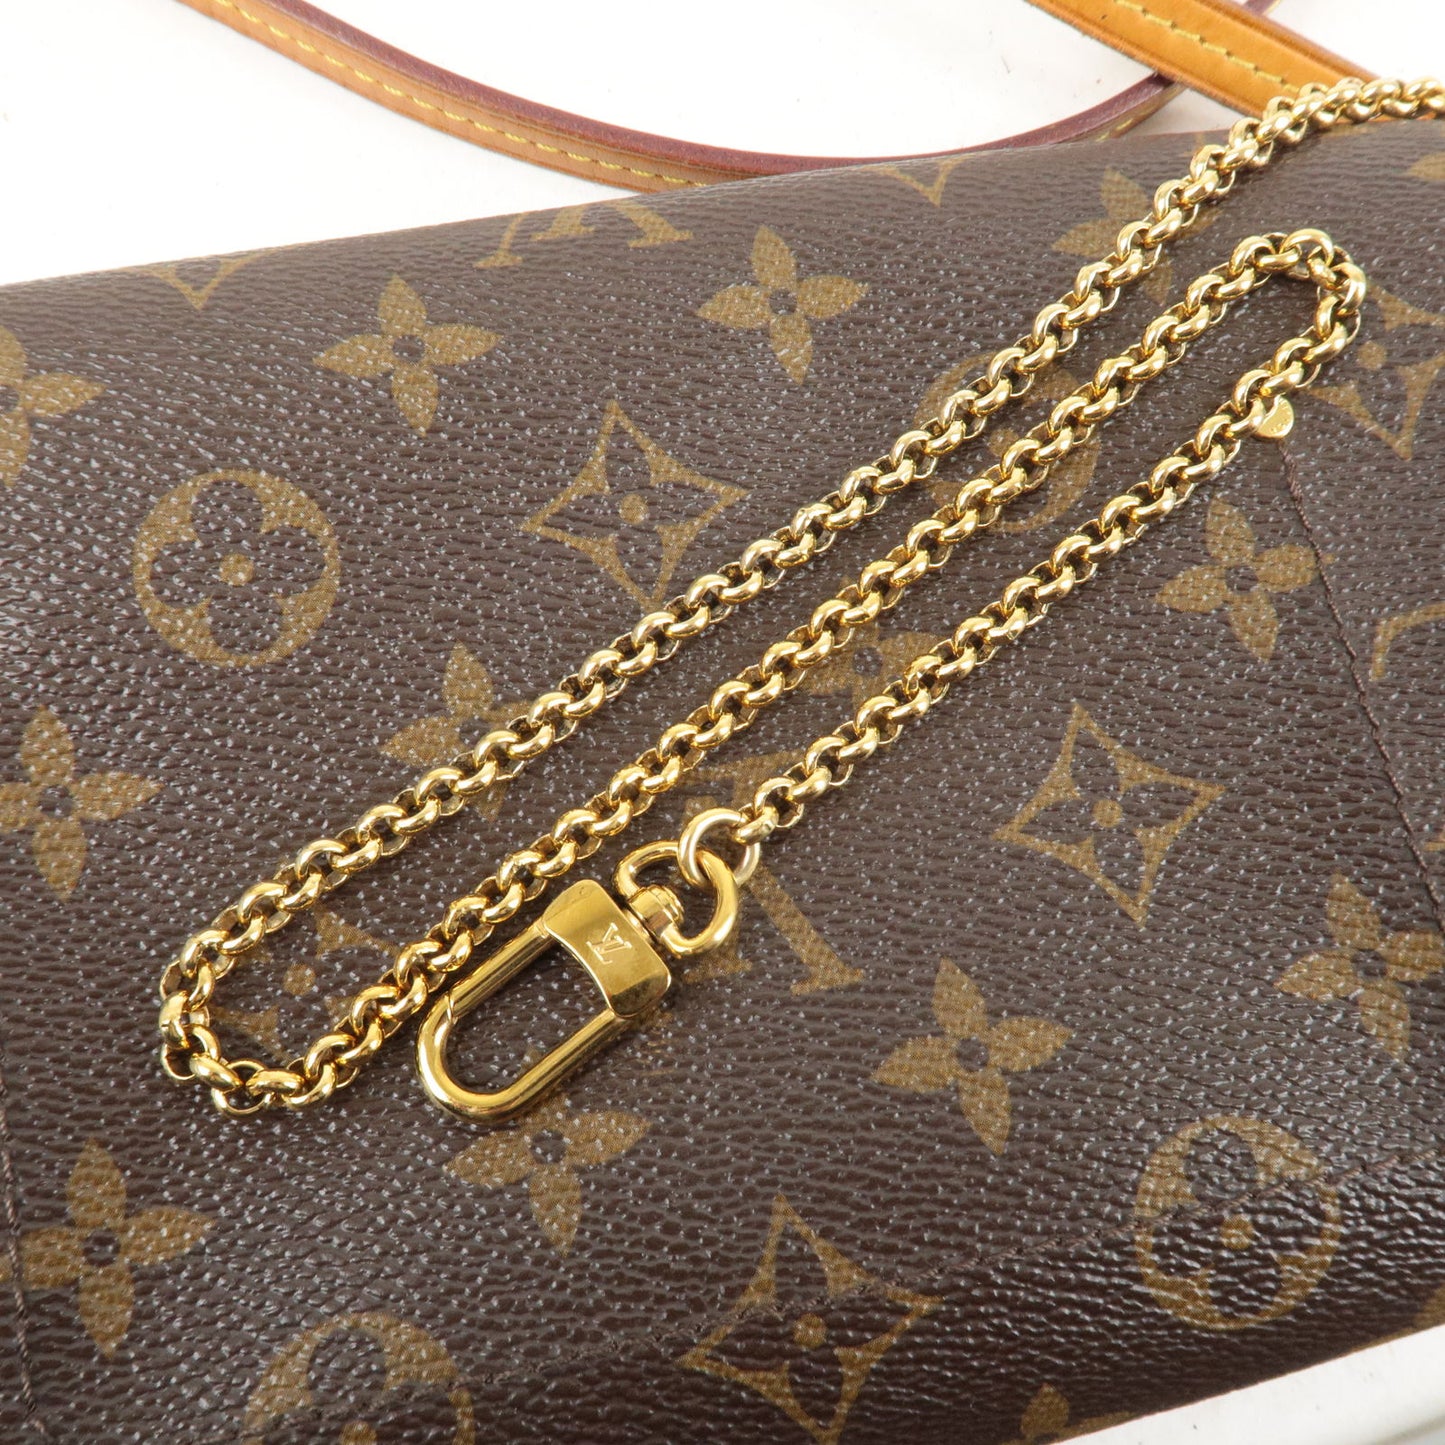 Authentic Louis Vuitton Favorite PM Monogram Canvas Cluth Bag Handbag  Article: M40717 Made in France, Accessorising - Brand Name / Designer  Handbags For Carry …